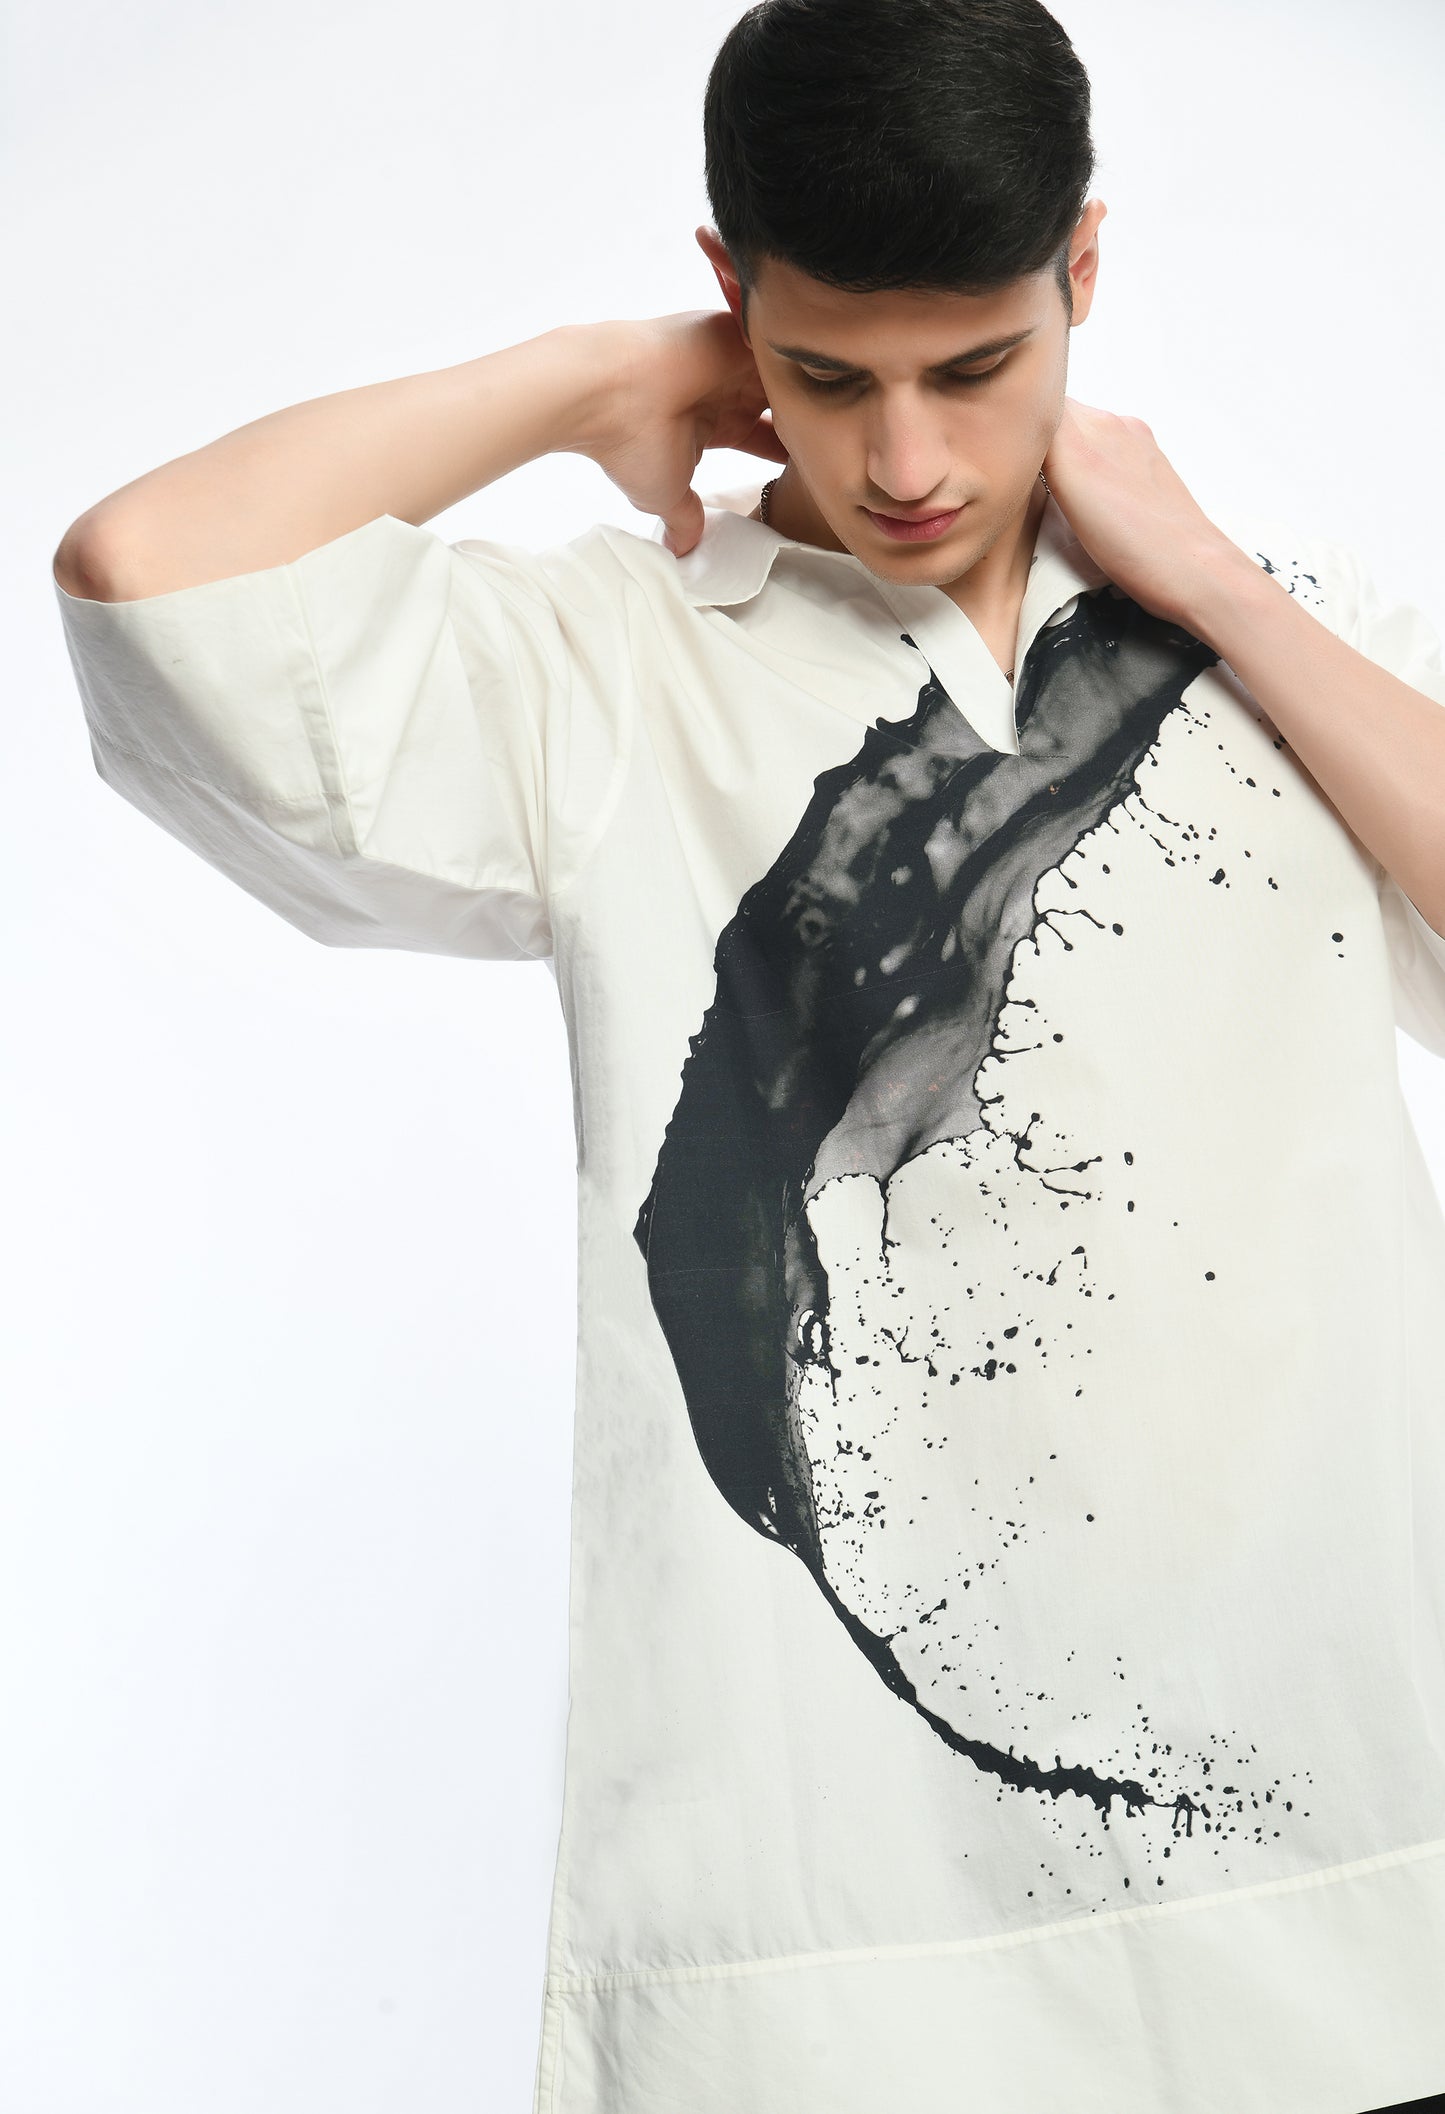 White, stylish, lose-fit, cotton shirt with digital print on it